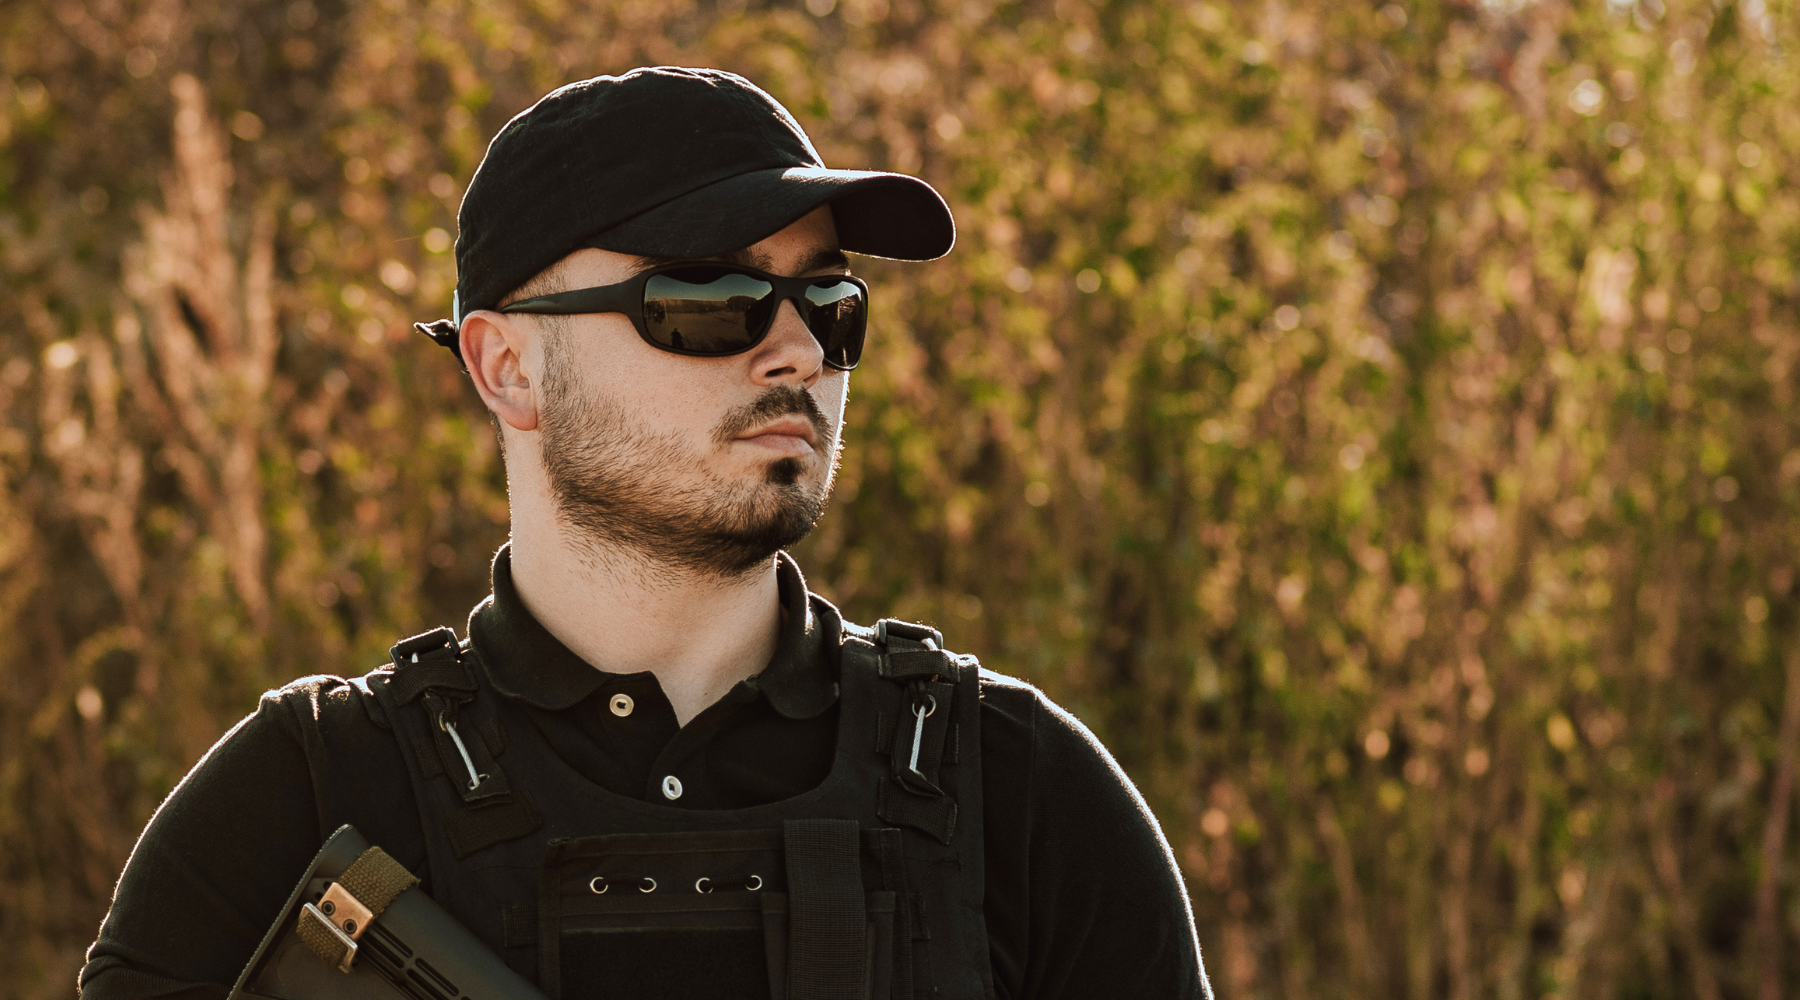 Man with Ballistic Eye Protection and Black Hat